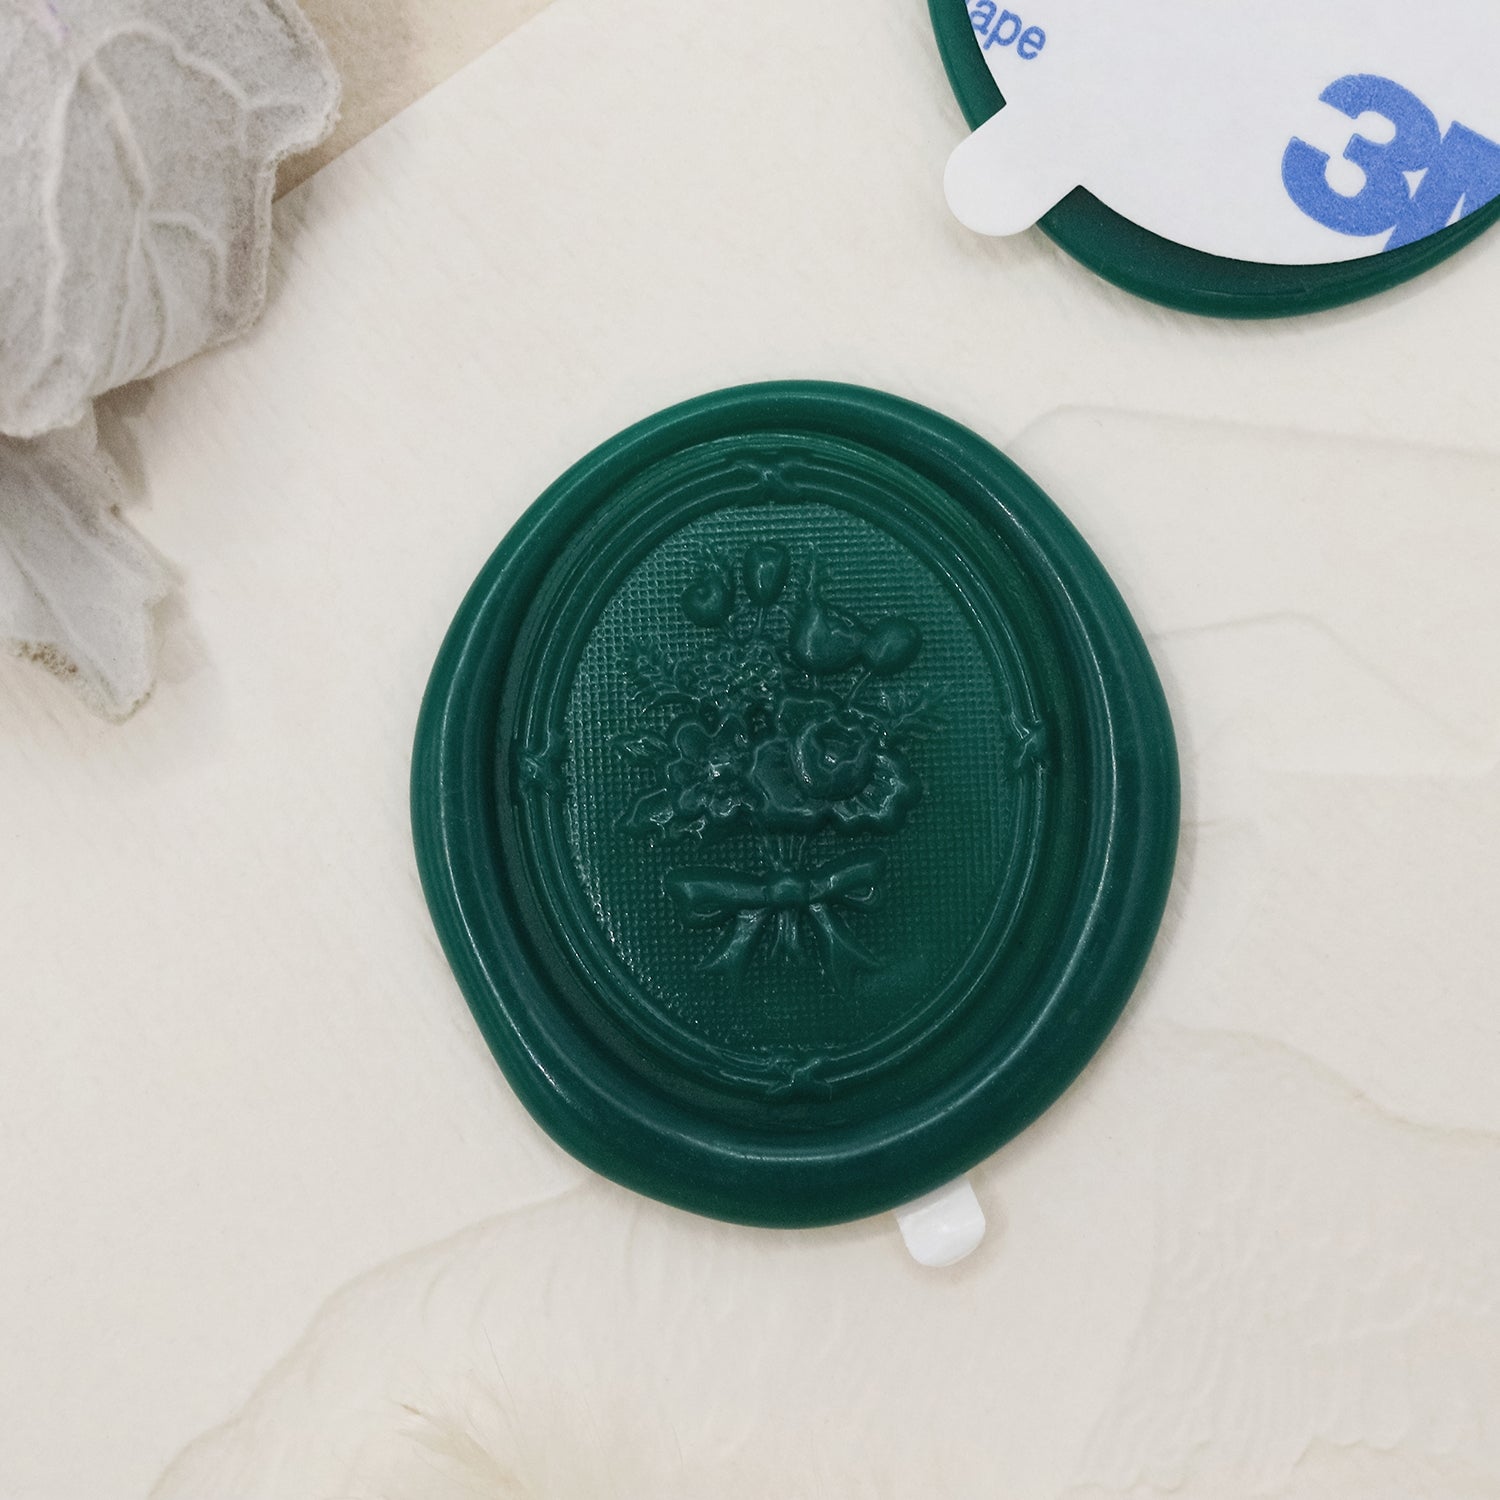 Stamprints 3D Relief Bouquet Self-adhesive Wax Seal Stickers 1